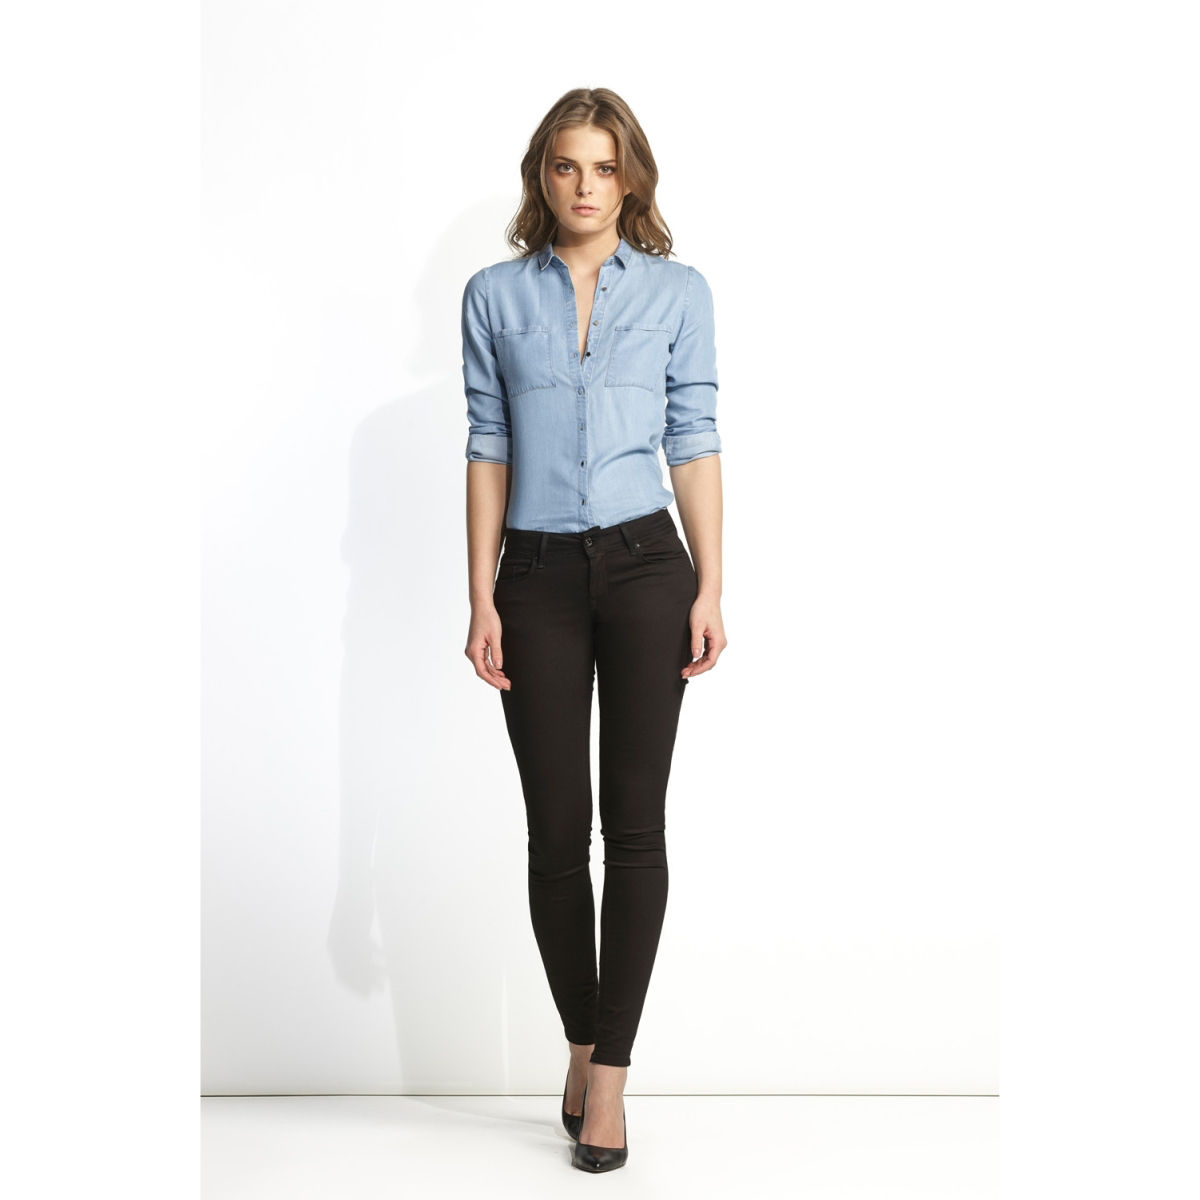 Colette Skinny Soft Touch Jeans Black